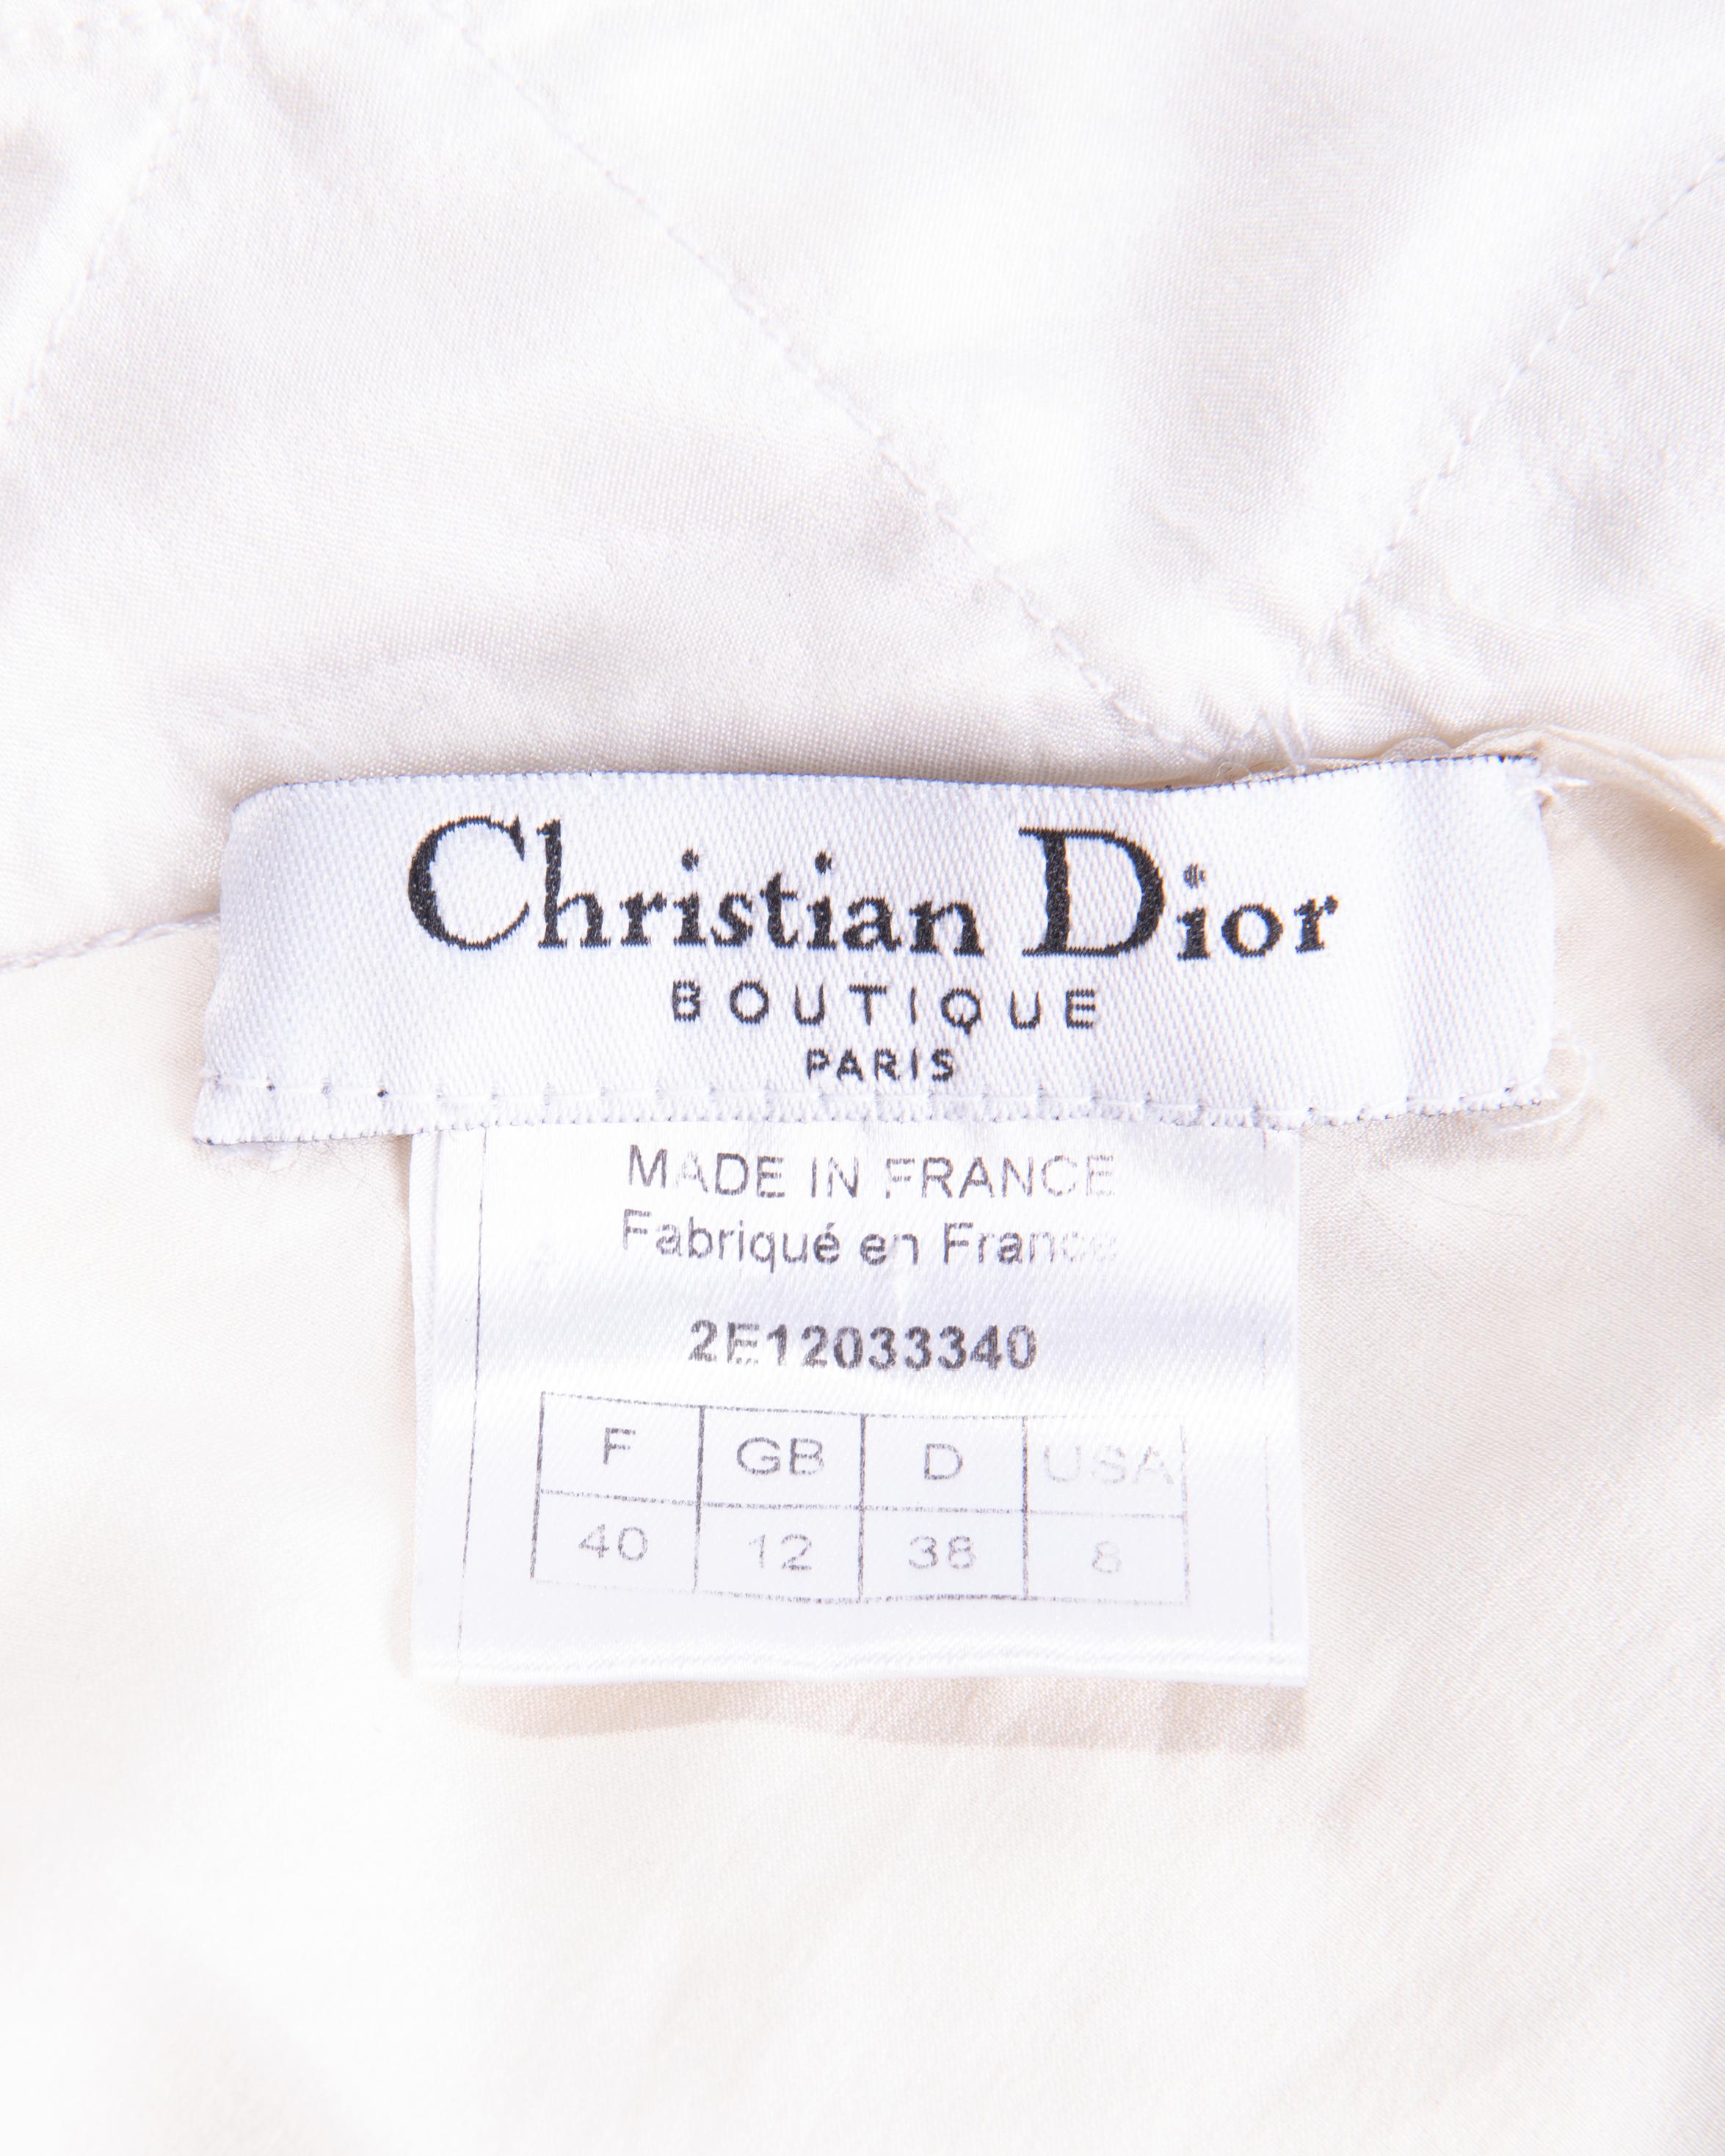 S/S 2002 Christian Dior by John Galliano White Asymmetrical Deconstructed Skirt 7